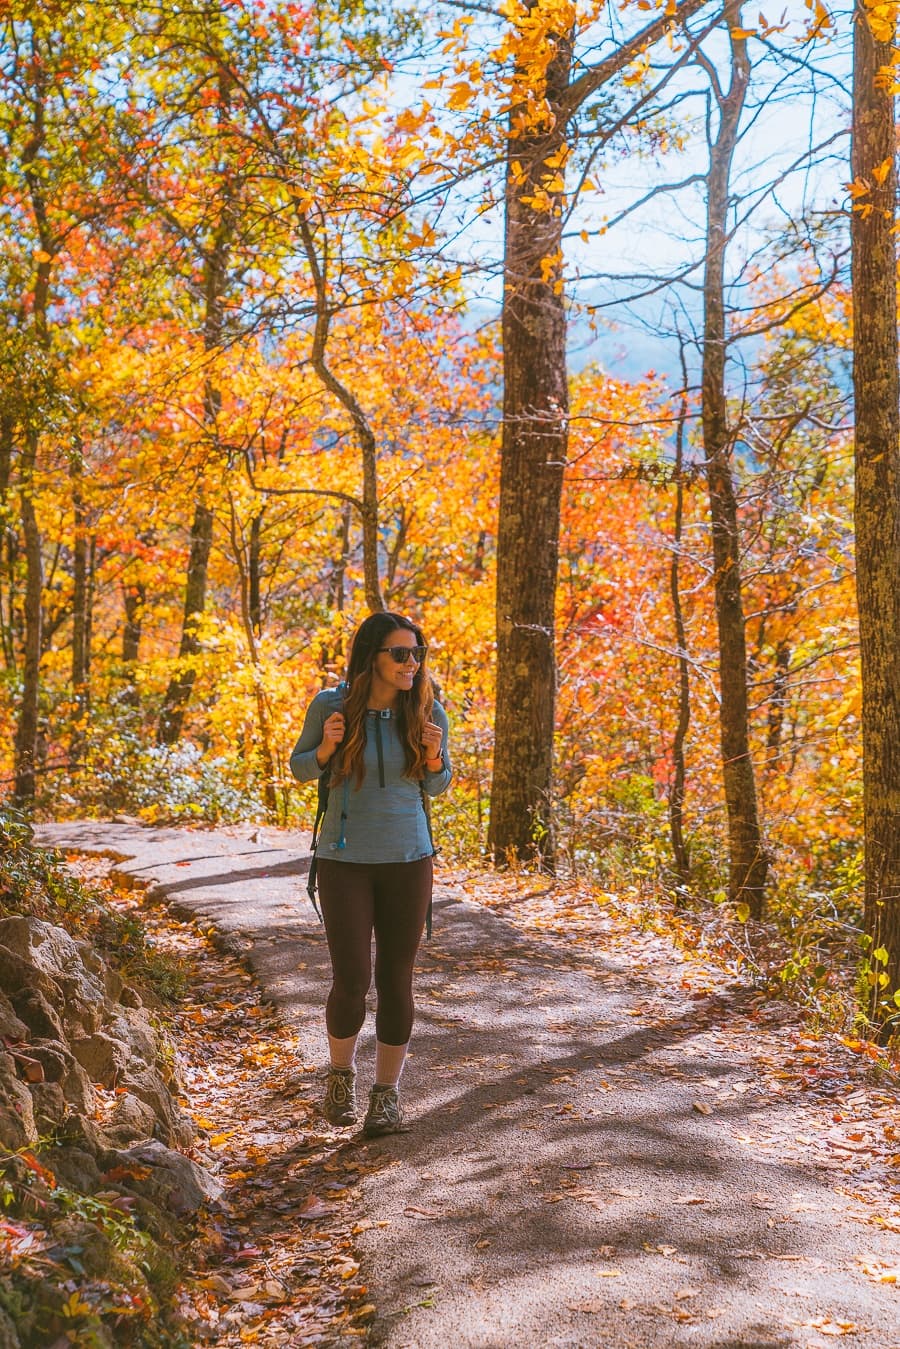 Best Great Smoky Mountain Hikes